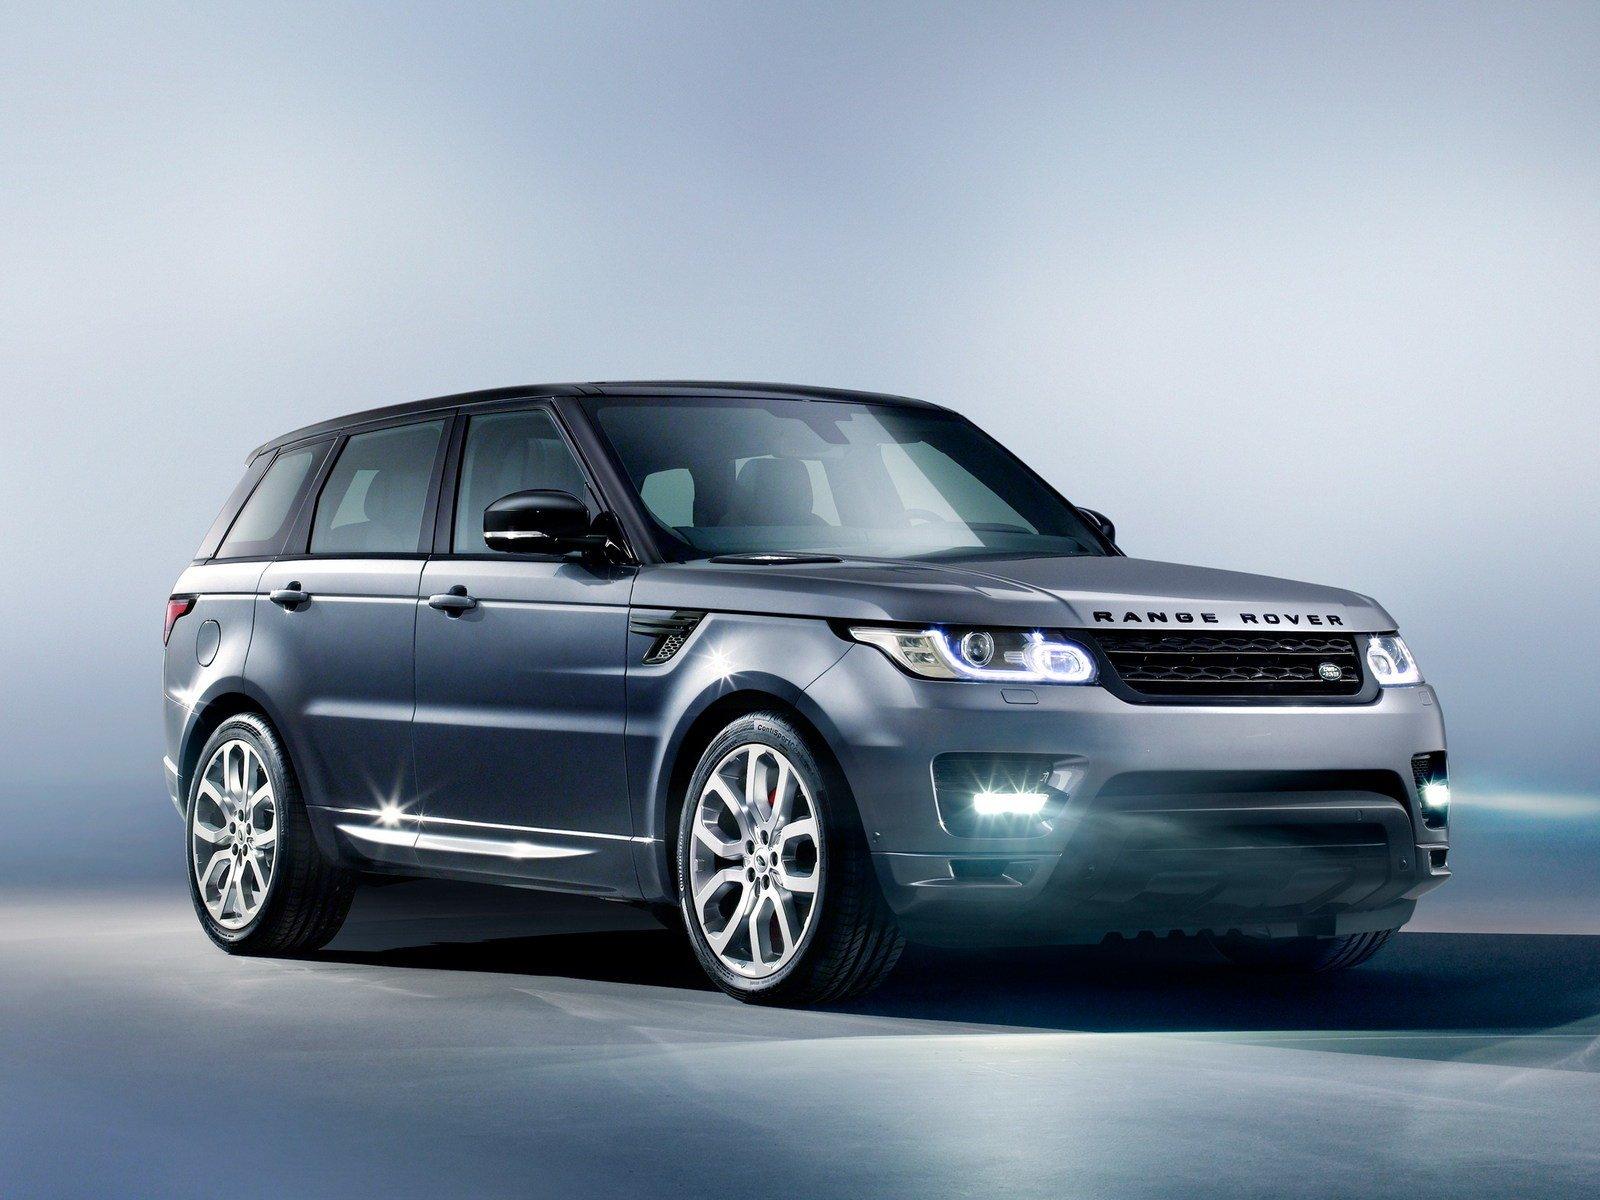 Land Rover Range Rover Sport Picture, Photo, Wallpaper